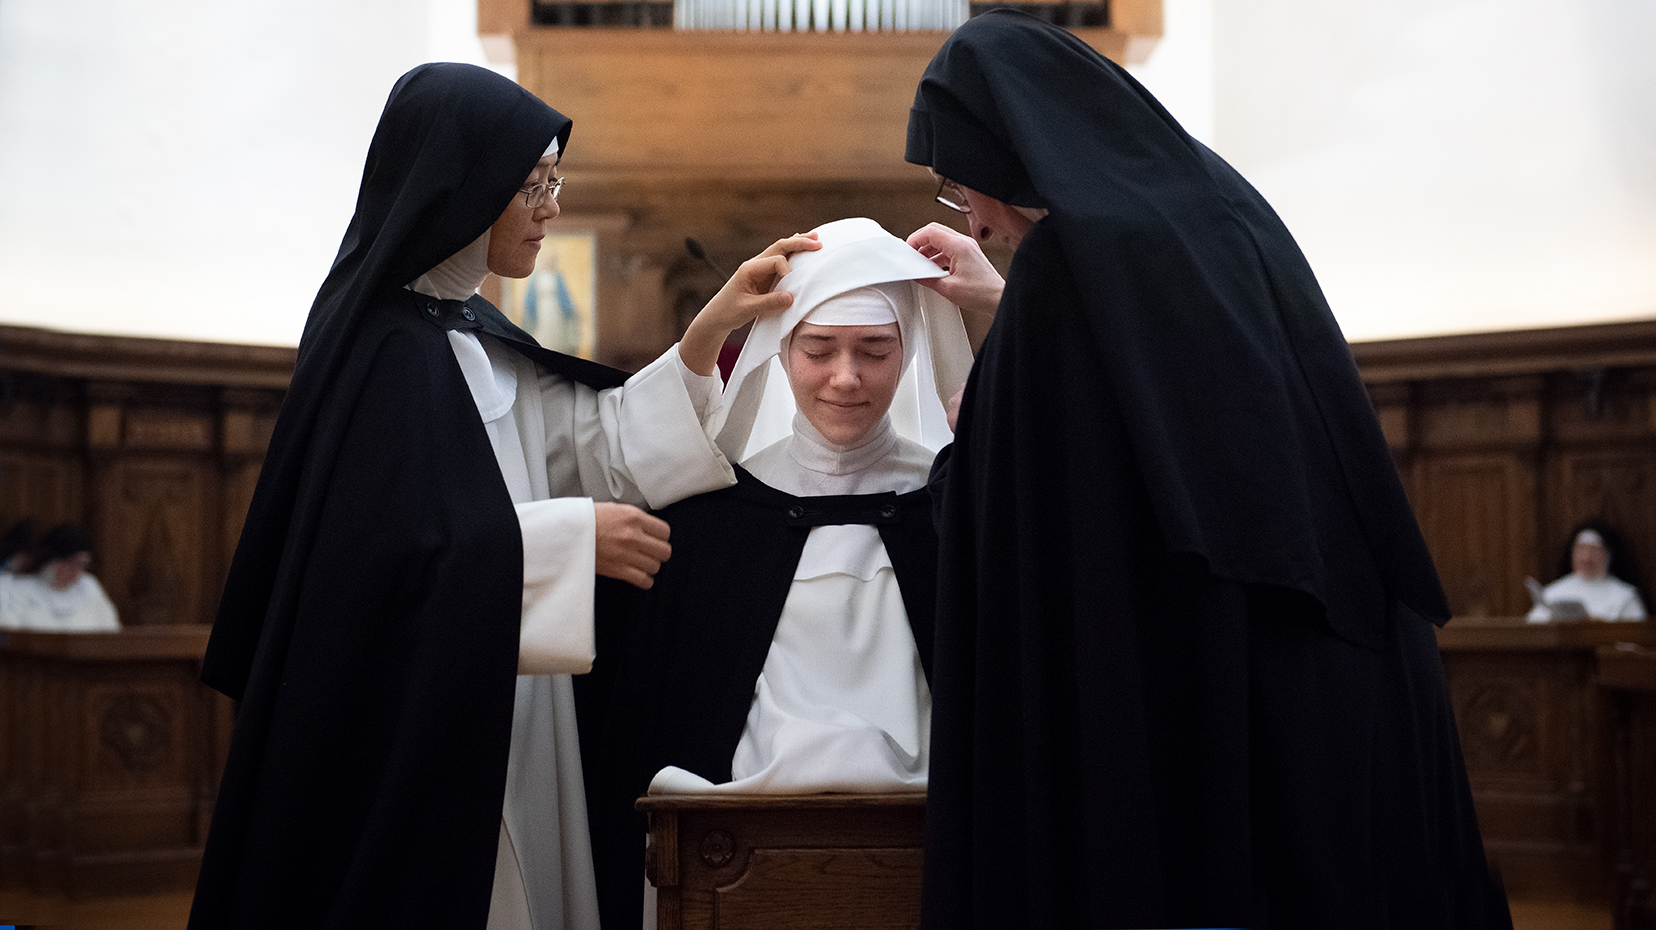 DOMINICAN NUNS FIRST PROFESSION